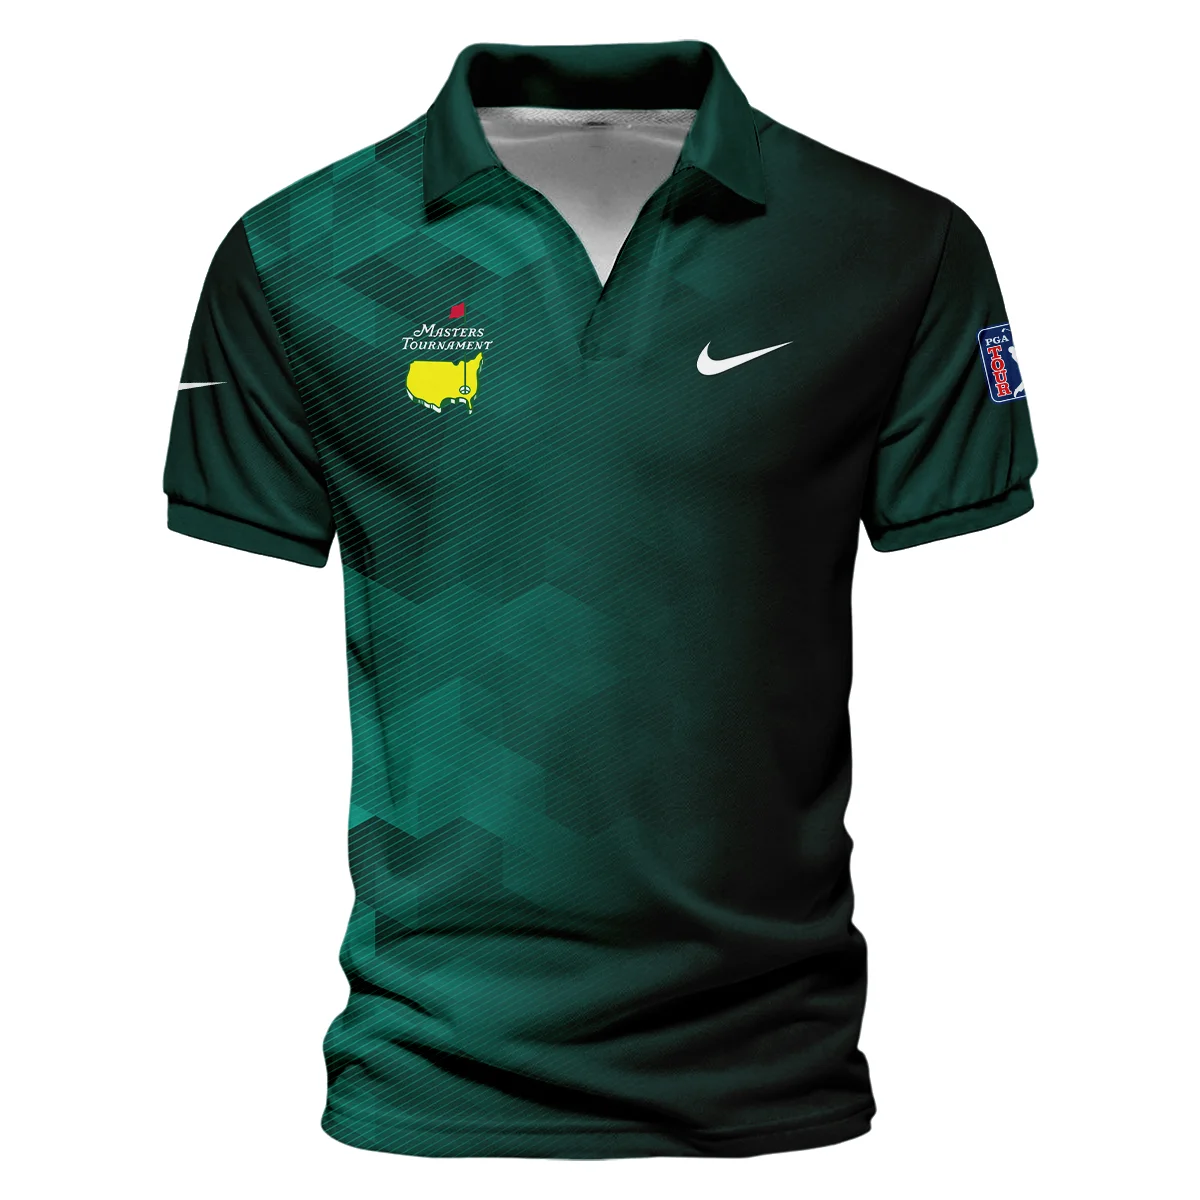 Nike Golf Sport Dark Green Gradient Abstract Background Masters Tournament Vneck Polo Shirt Style Classic Polo Shirt For Men